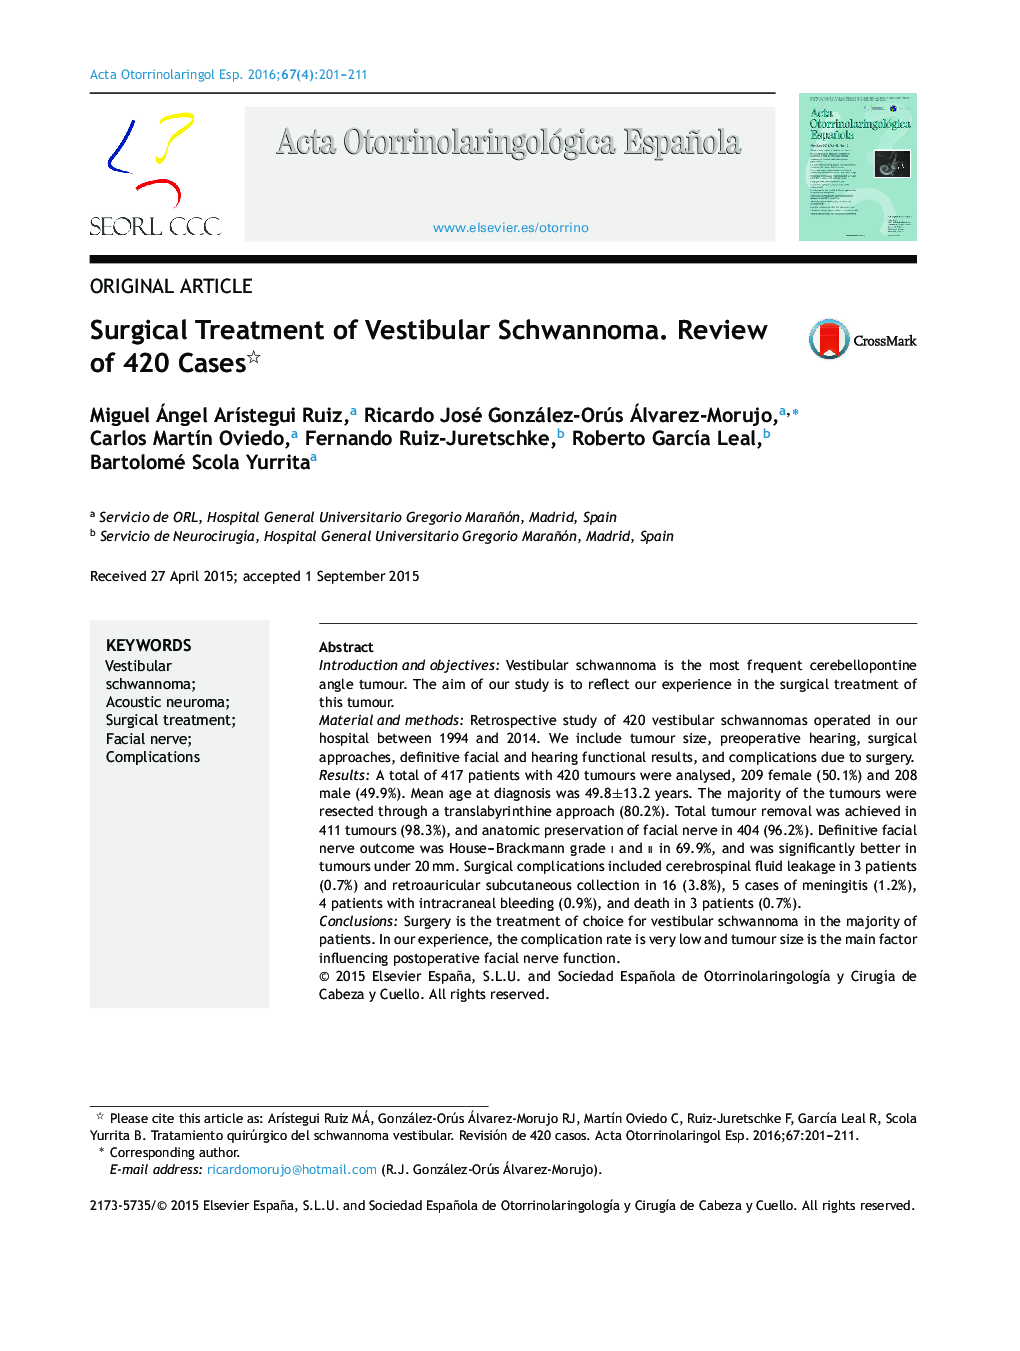 Surgical Treatment of Vestibular Schwannoma. Review of 420 Cases 